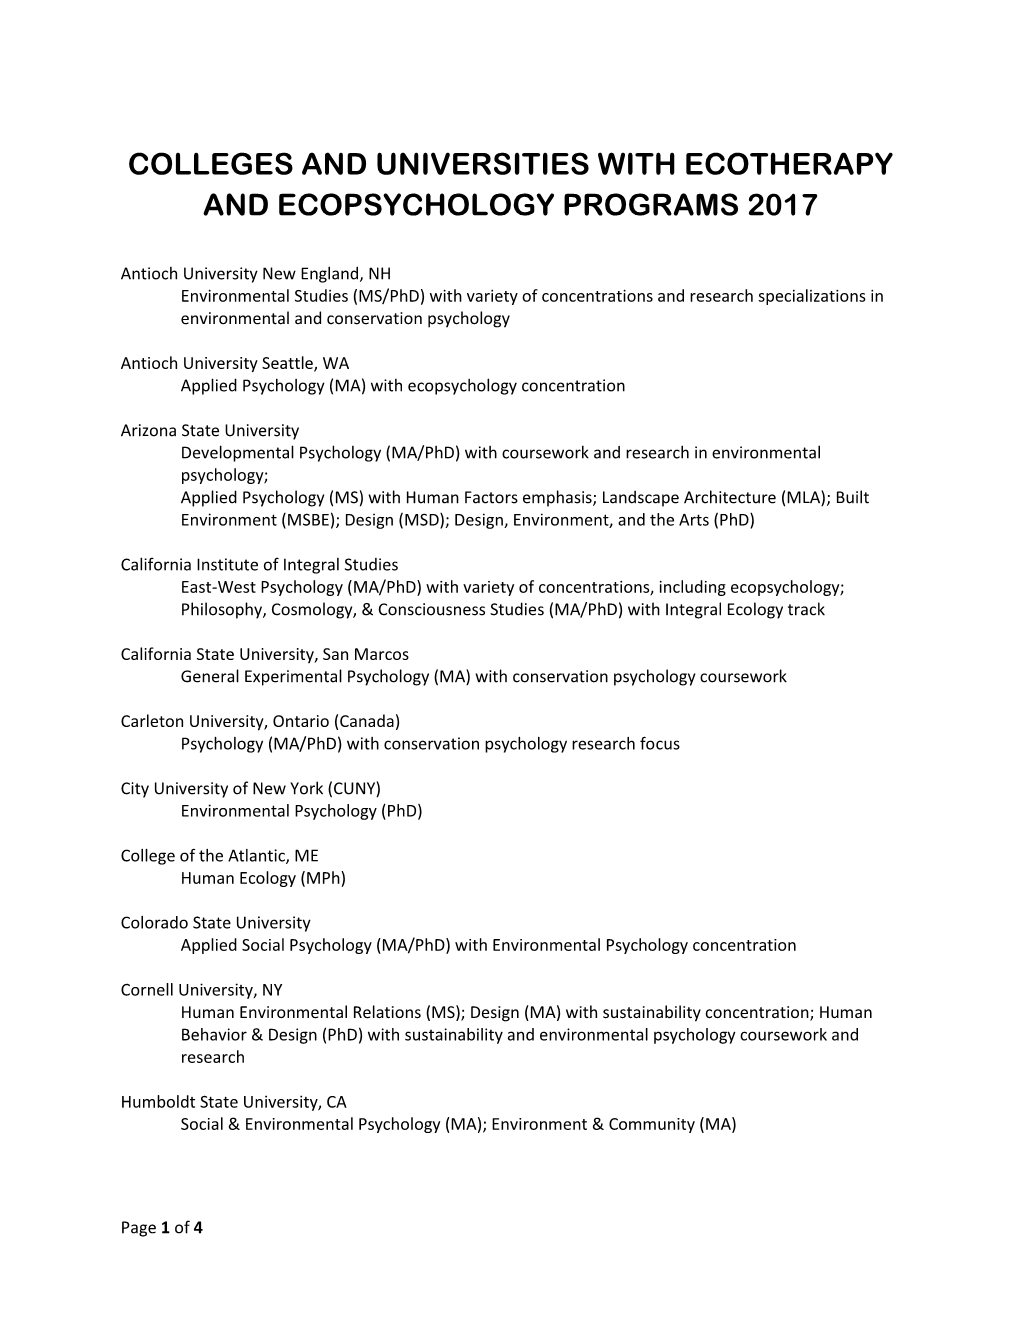 Colleges and Universities with Ecotherapy and Ecopsychology Programs 2017